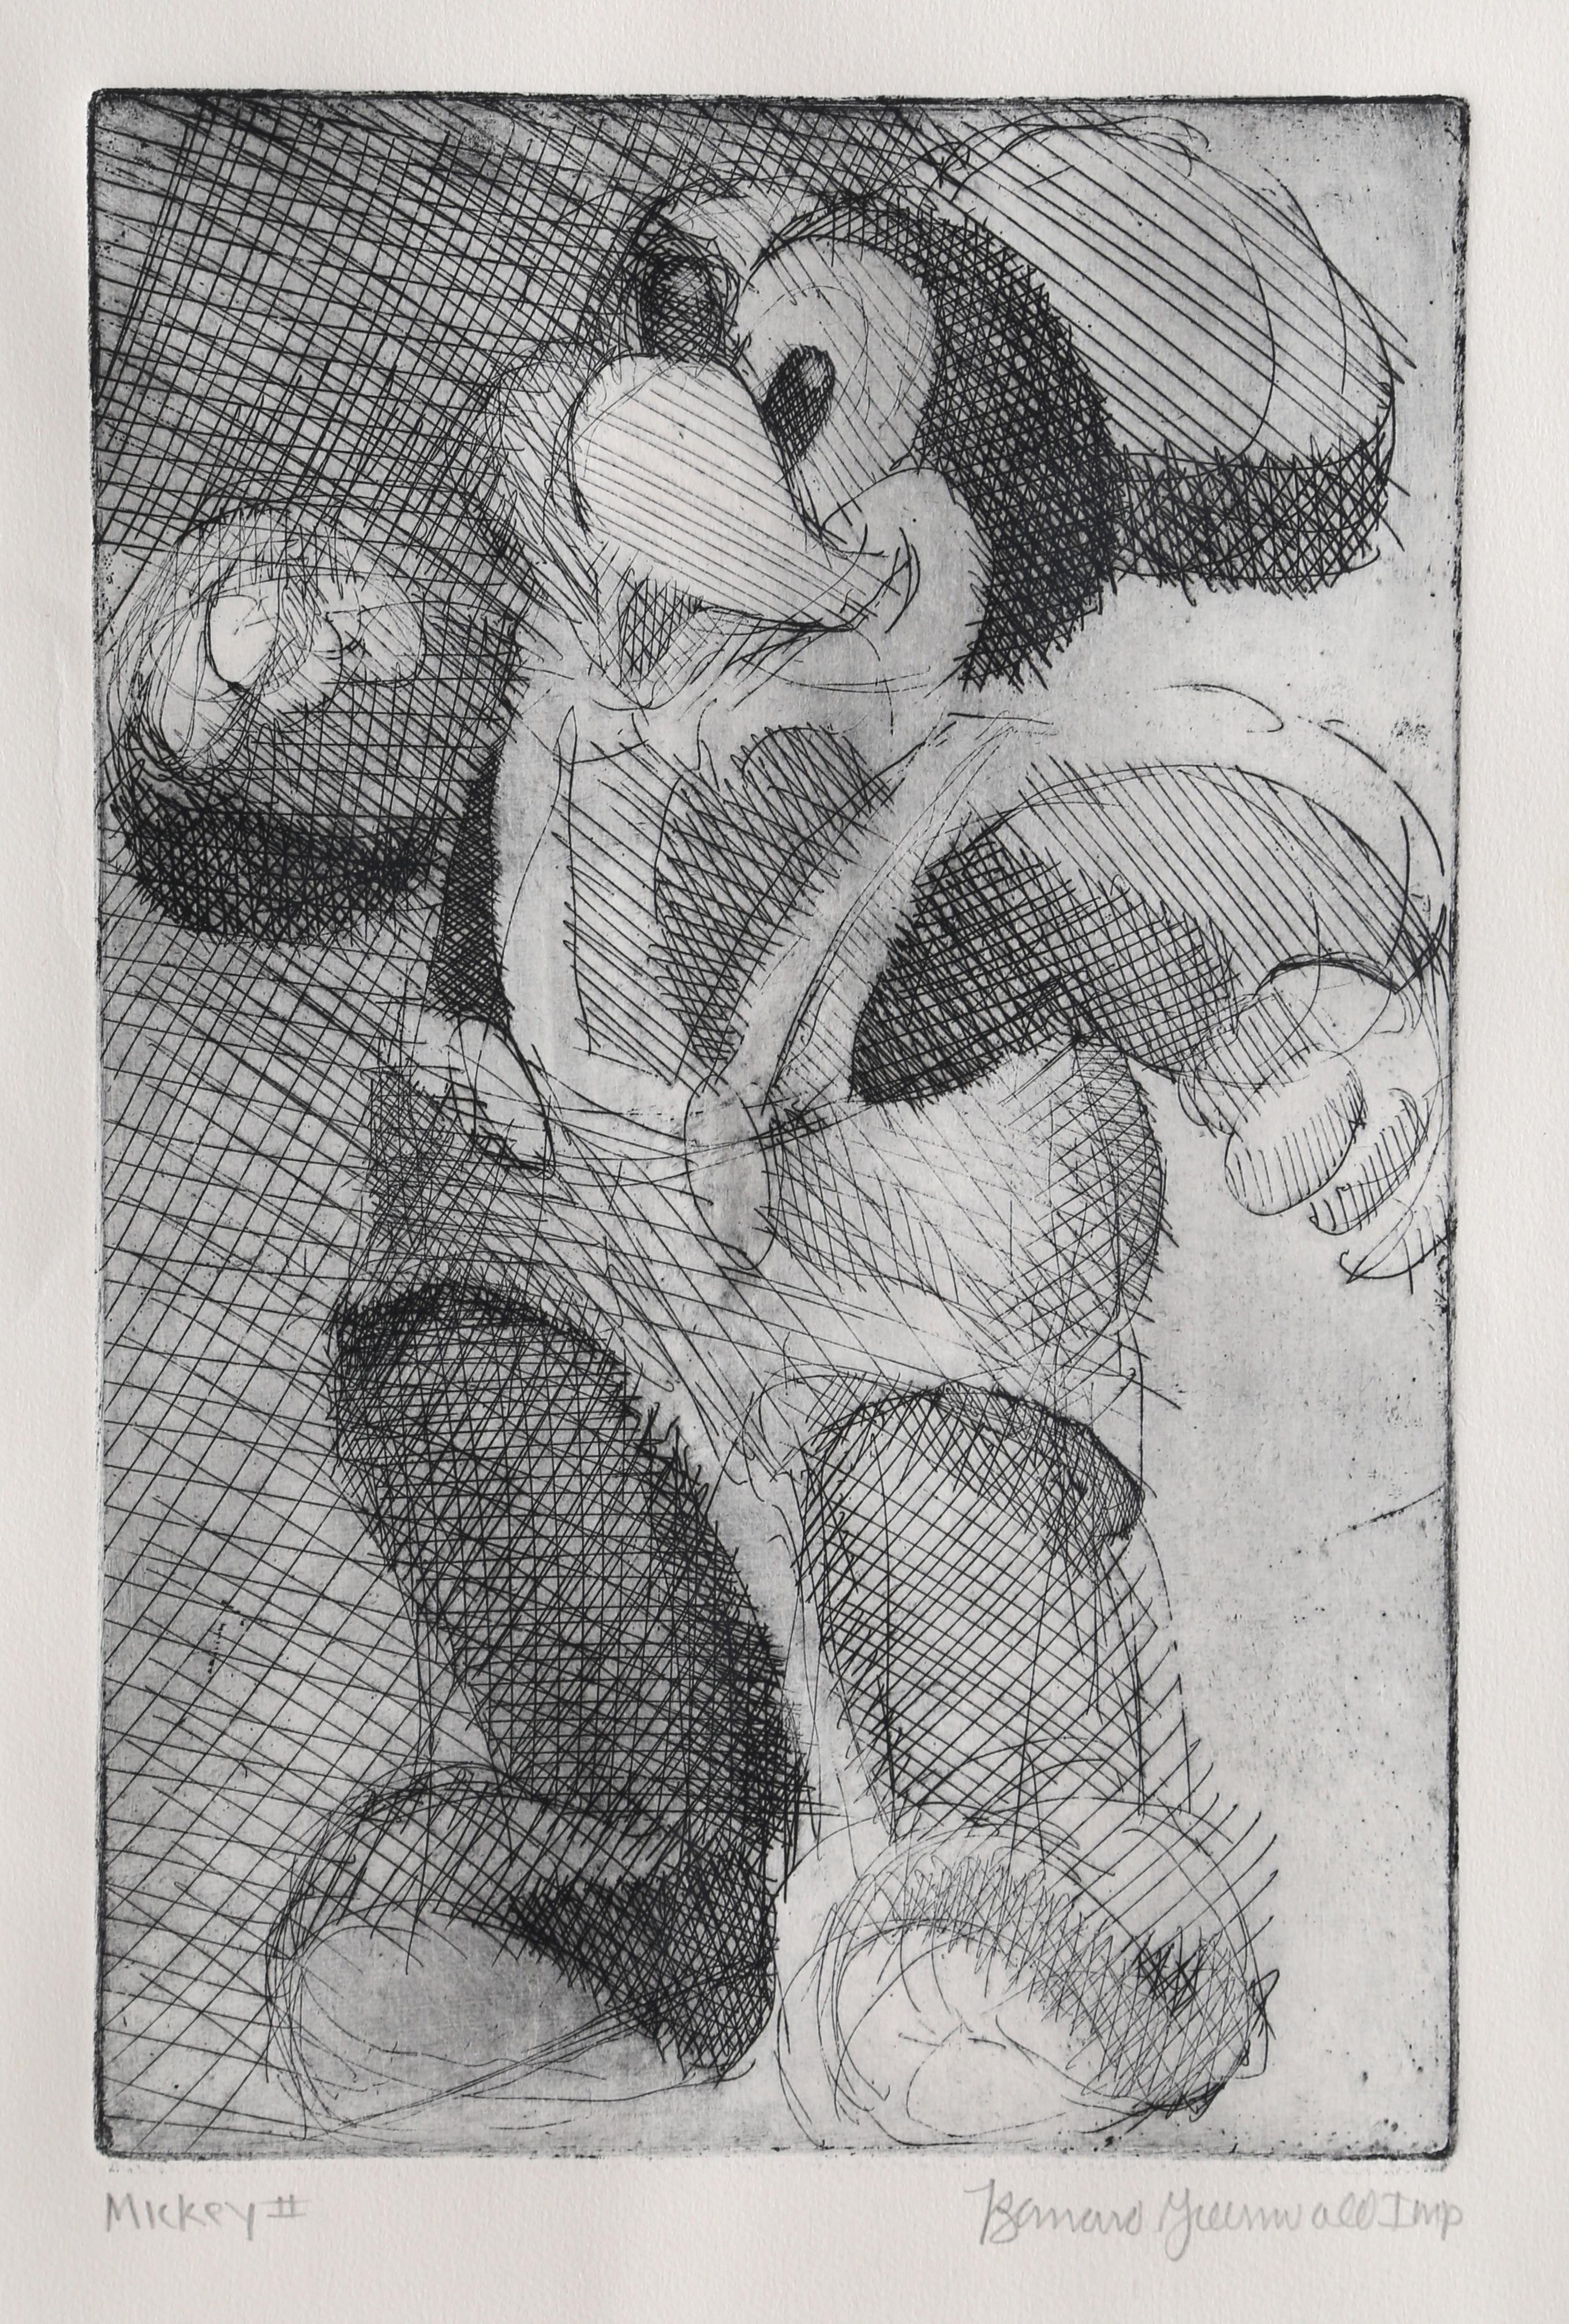 Mickey Mouse #1, Etching by Bernard Greenwald